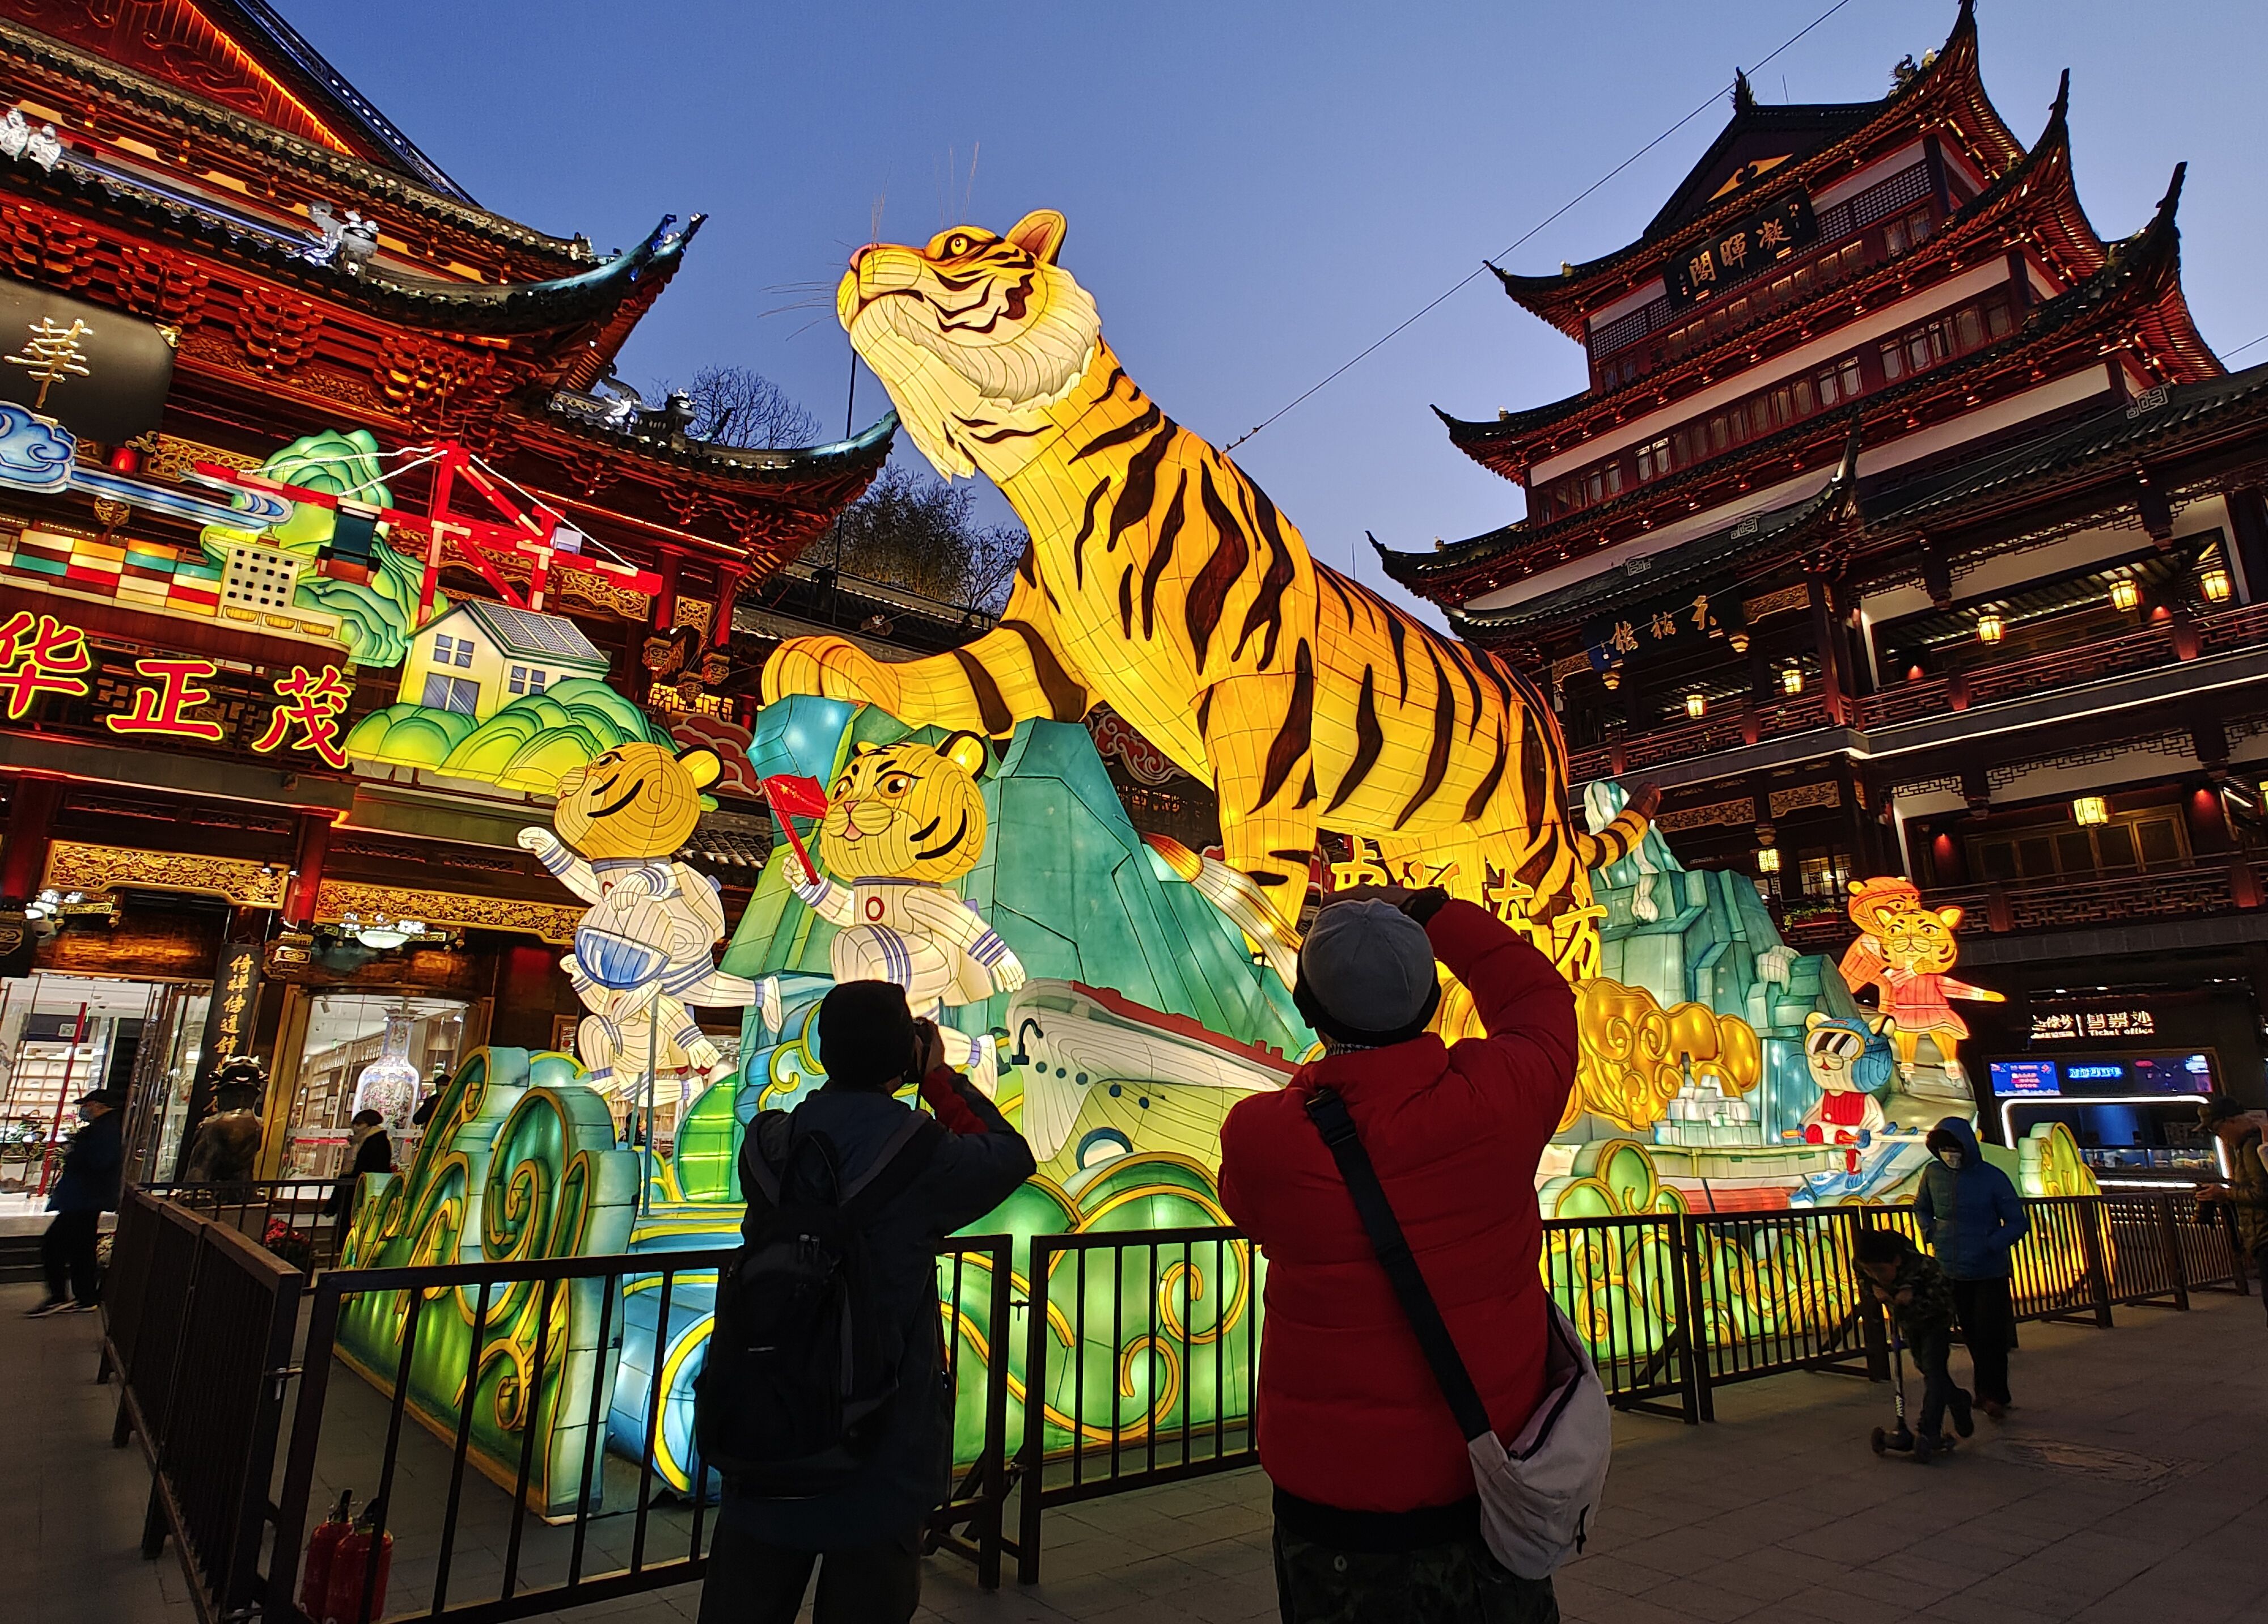 Lunar New Year: Welcoming the Year of the Tiger